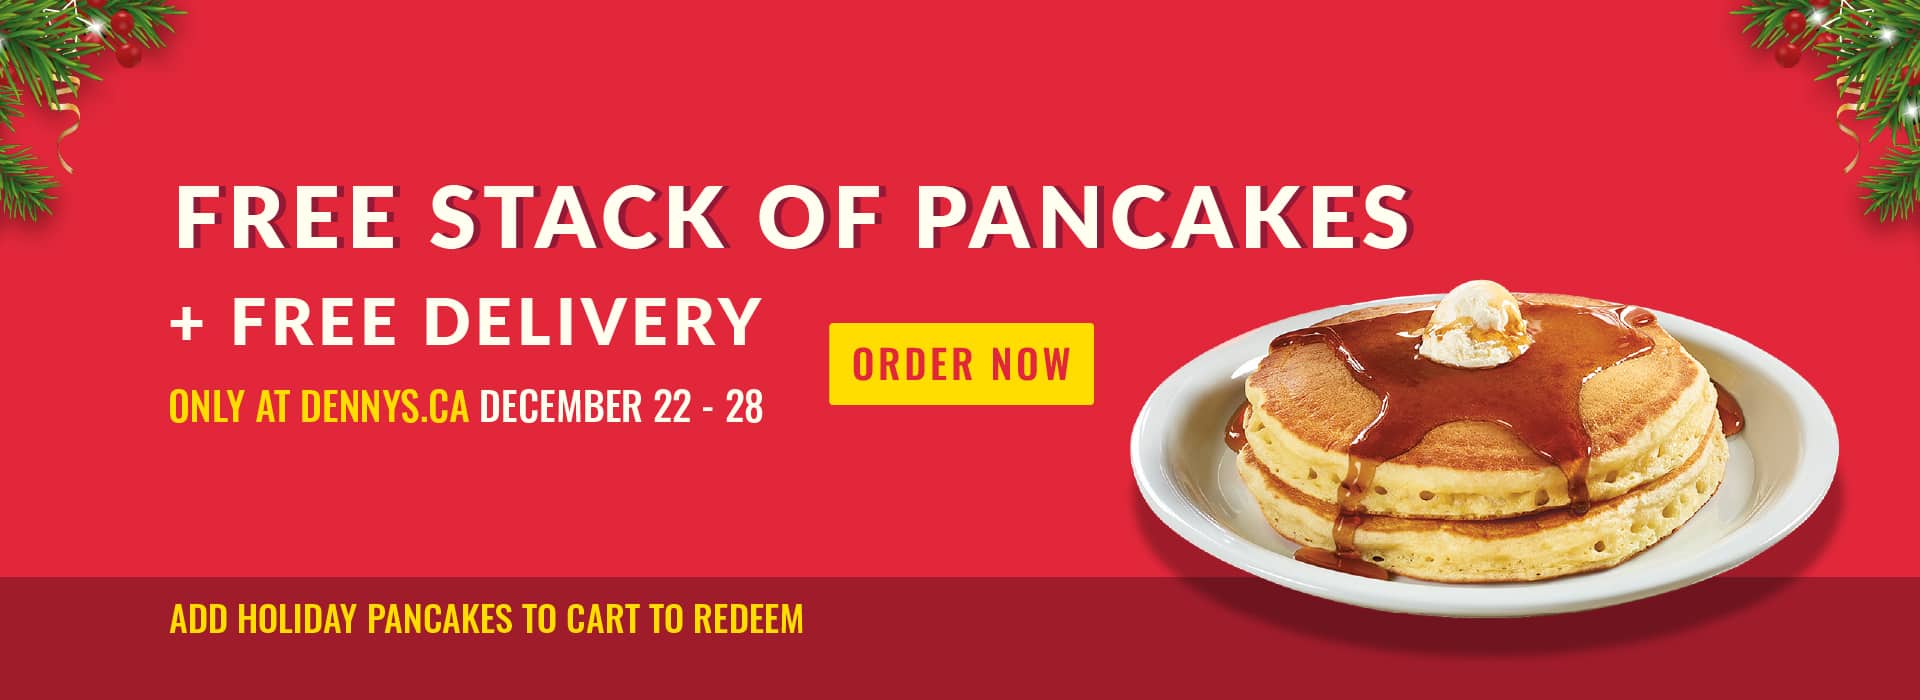 FREE PANCAKES + FREE DELIVERY ON DENNYS.CA Denny's Canada